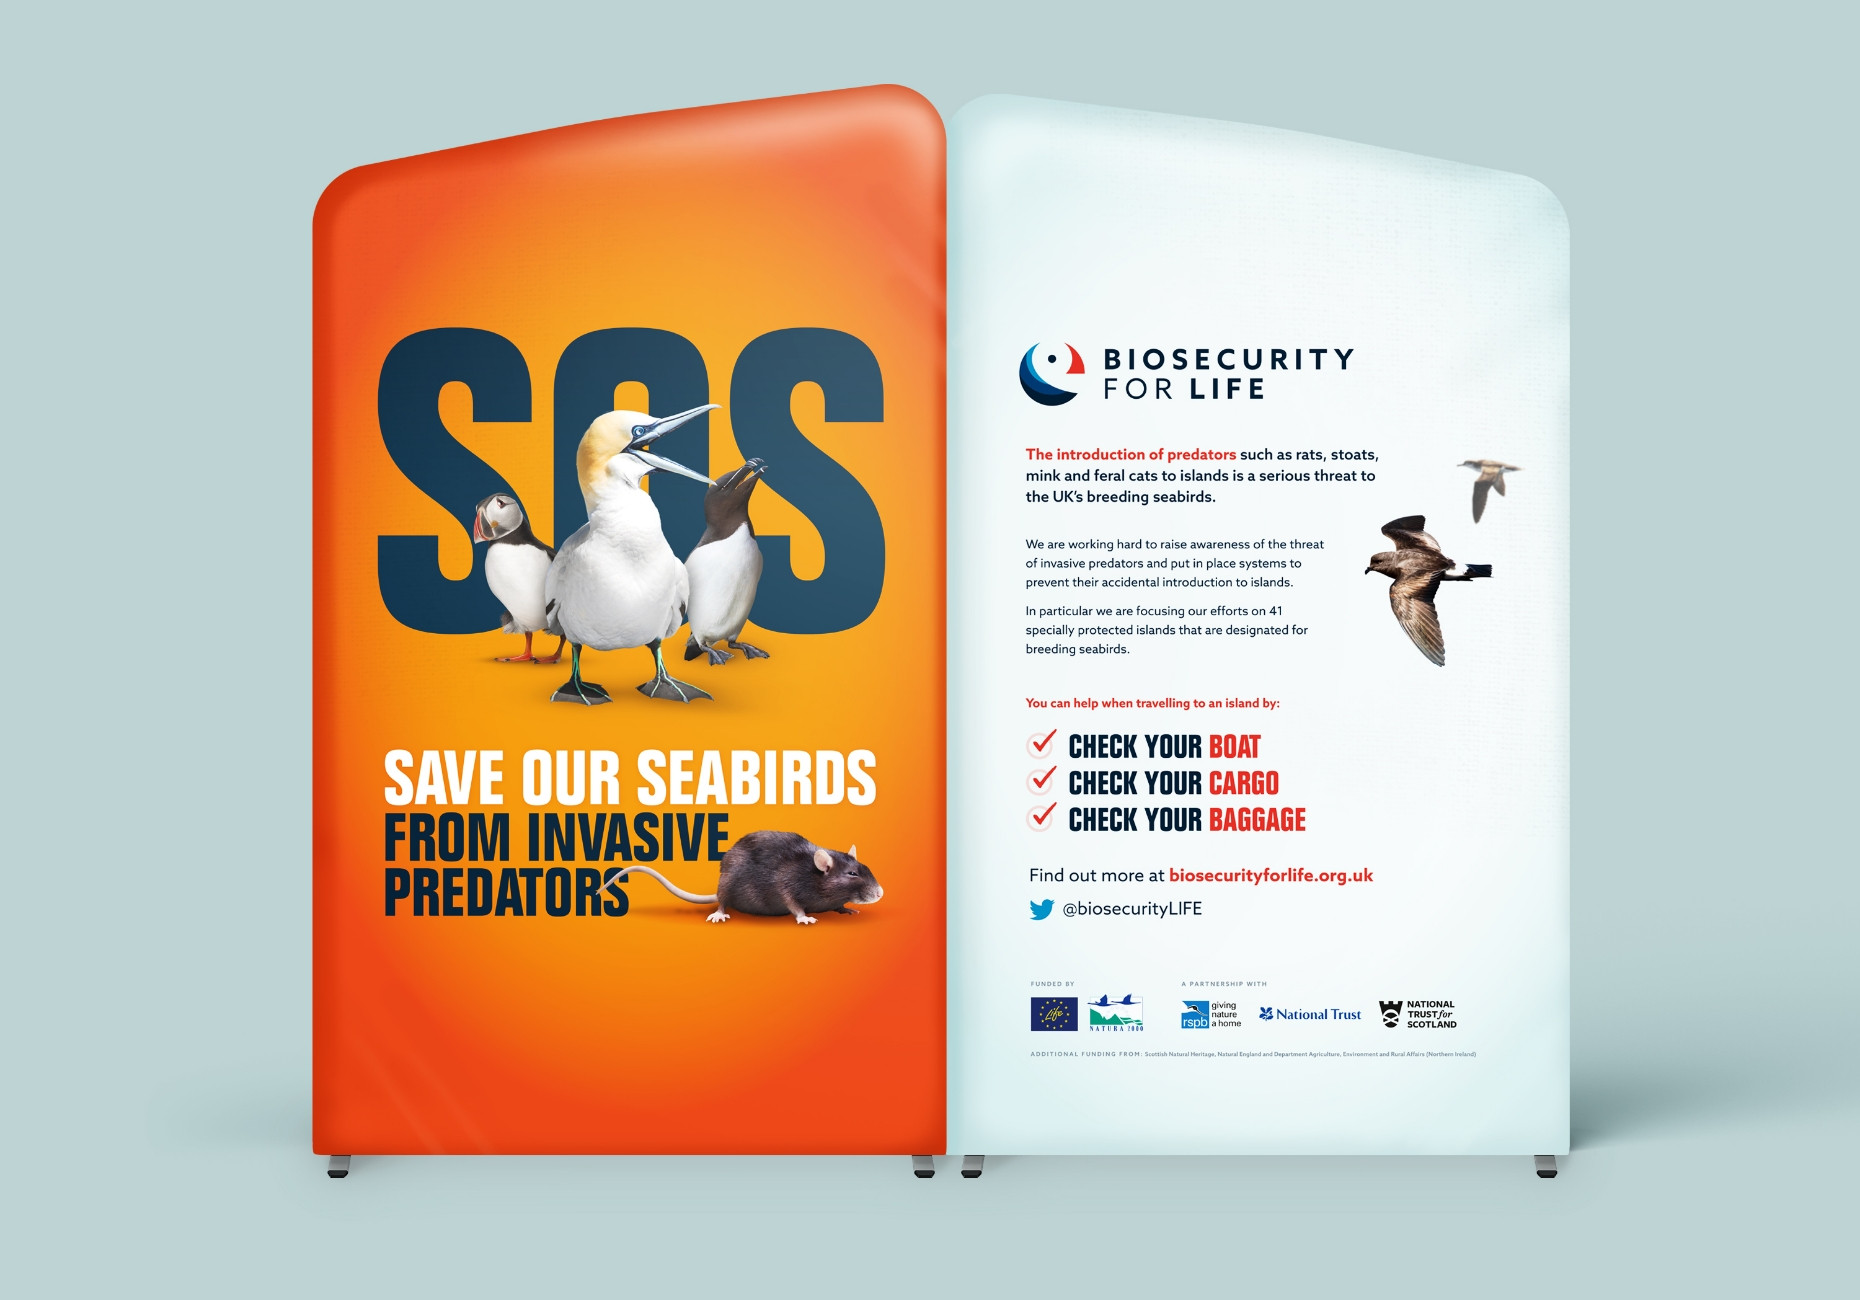 RSPB charity seabird protection marketing exhibition display design by Root Studio